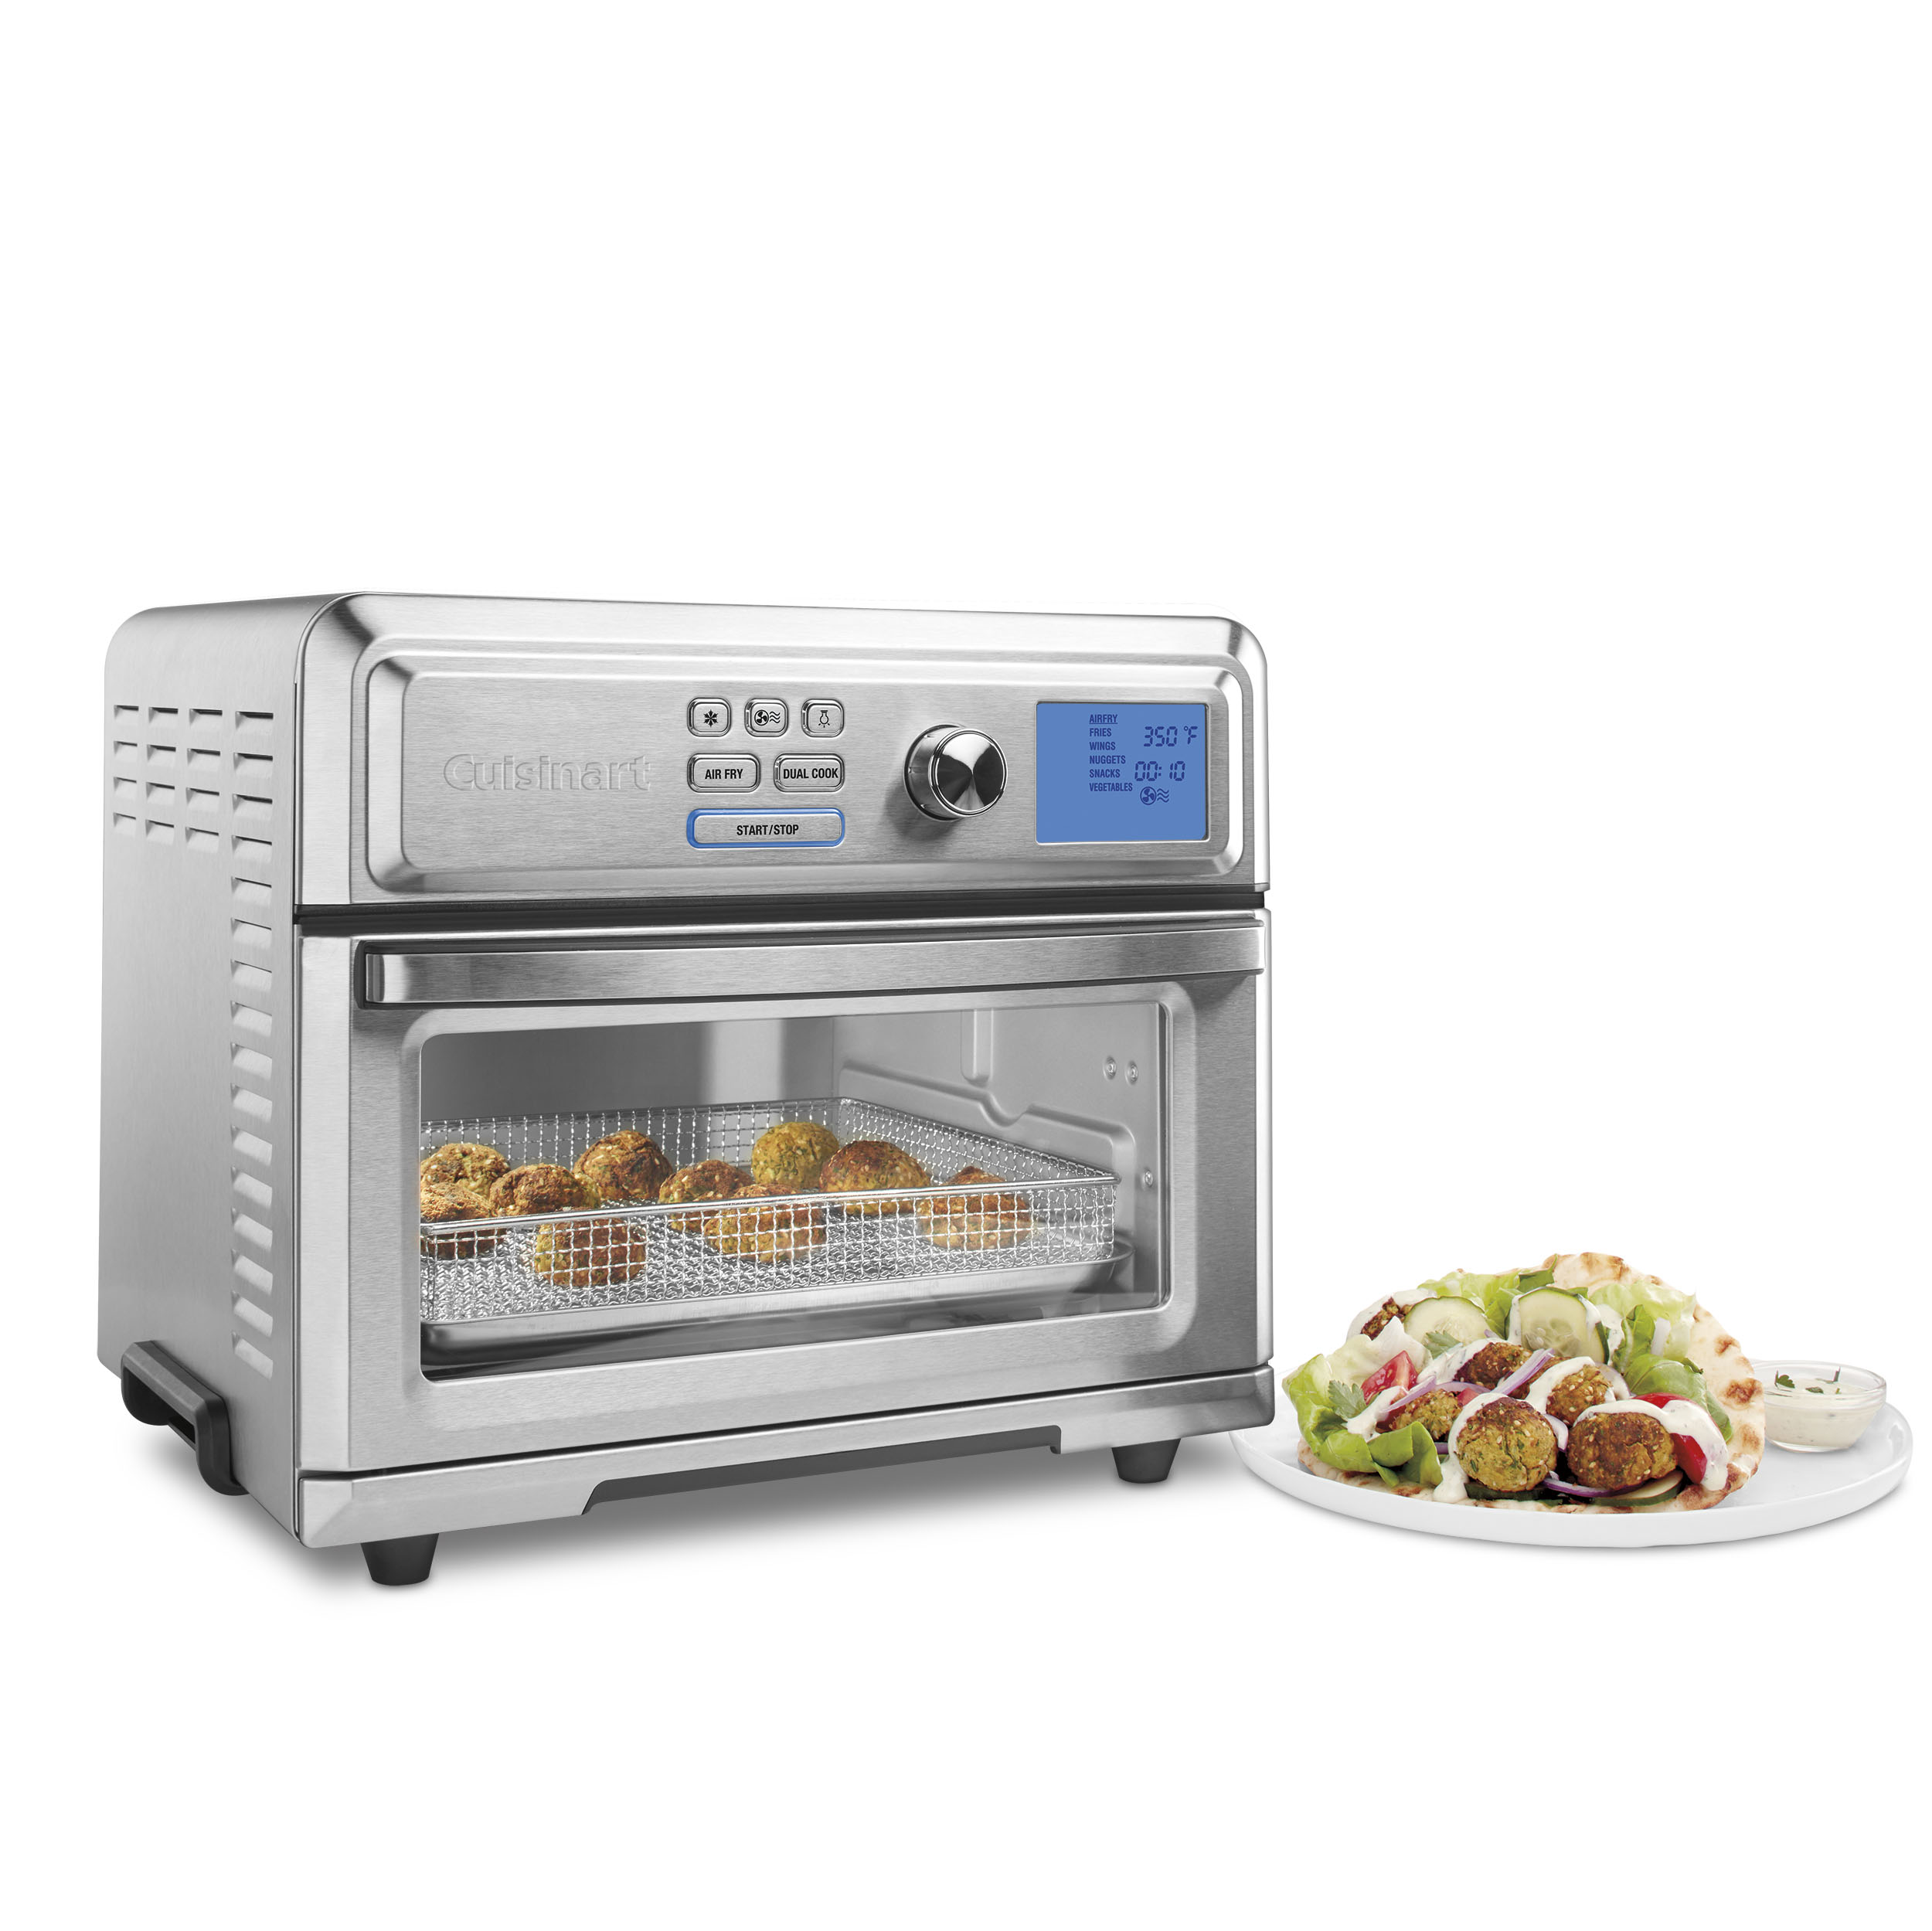 Cuisinart TOA-65 Digital Convection Toaster Oven Airfryer, Silver - image 2 of 3